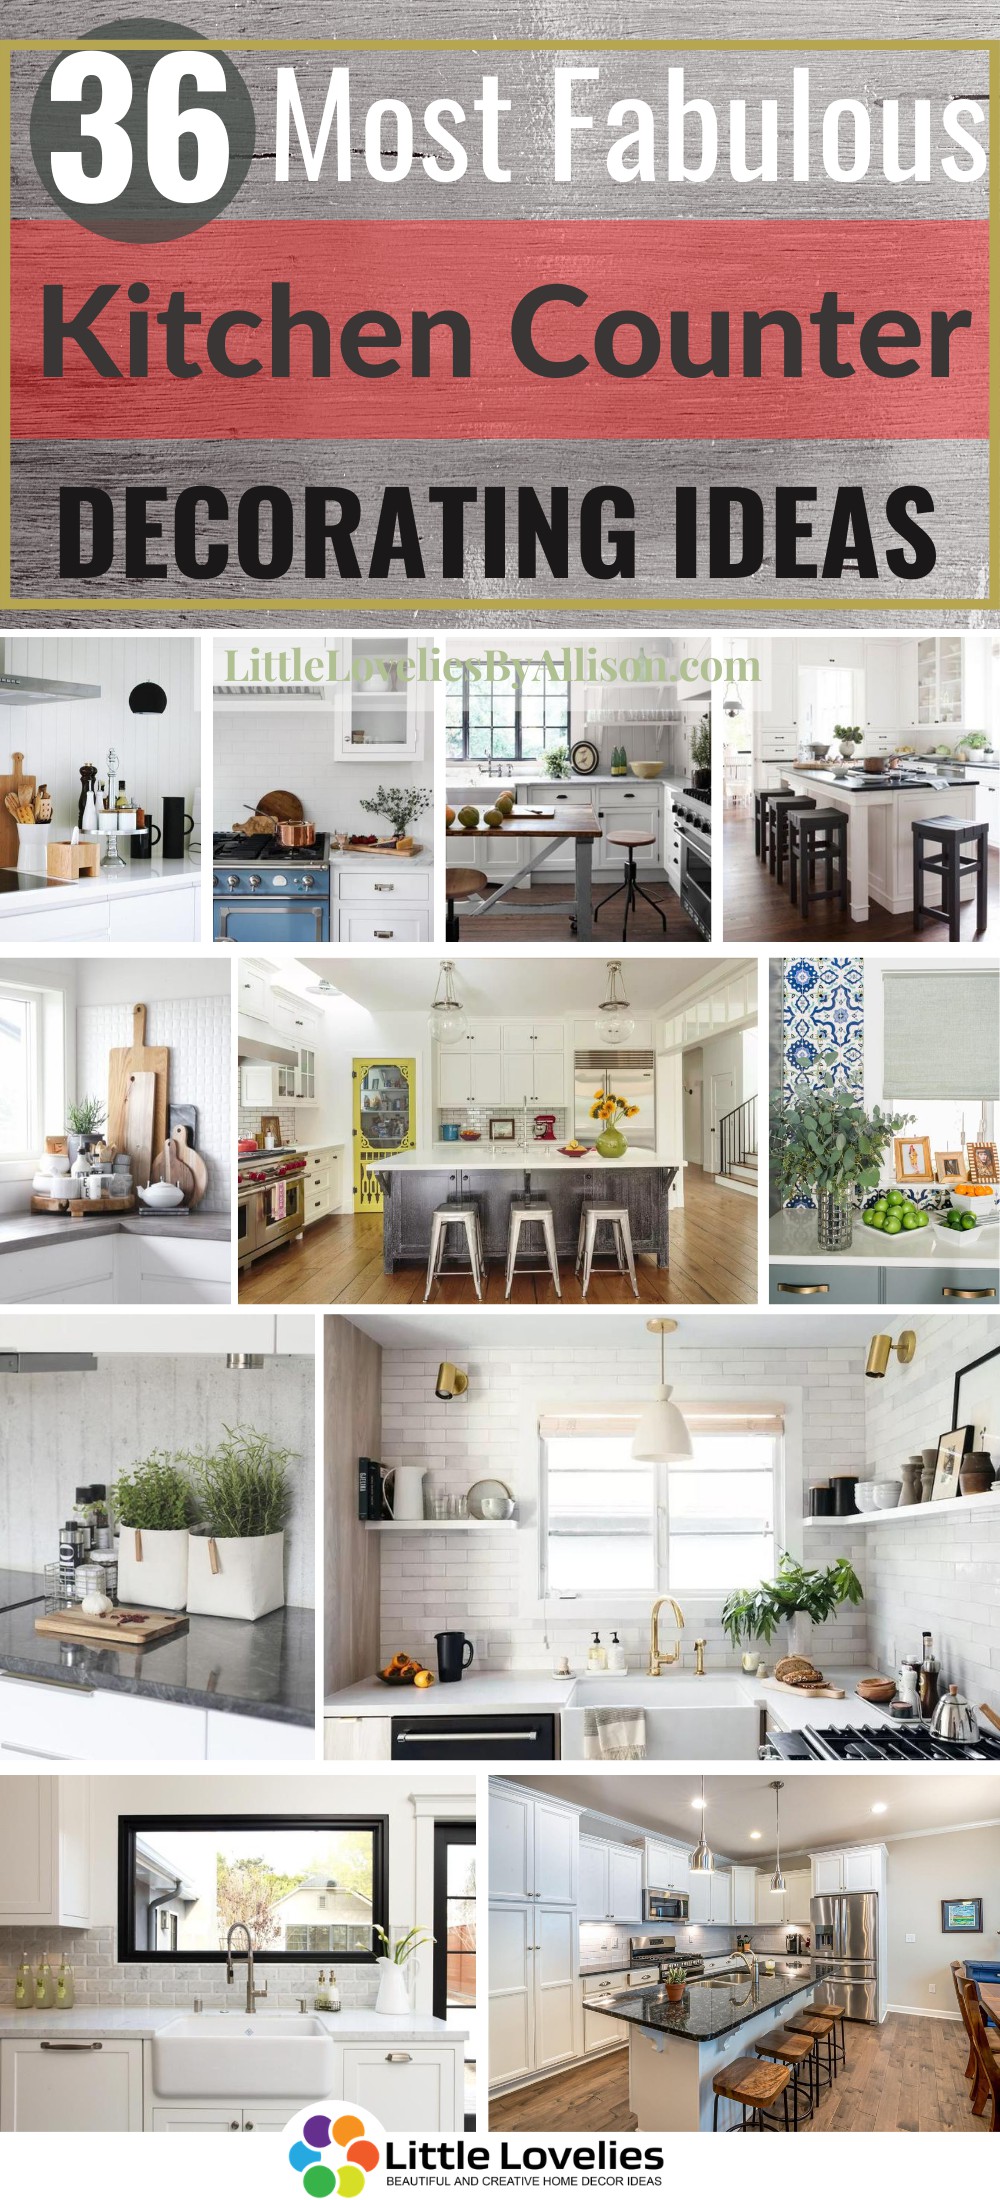 20 Of The Most Fabulous Kitchen Counter Decorating Ideas